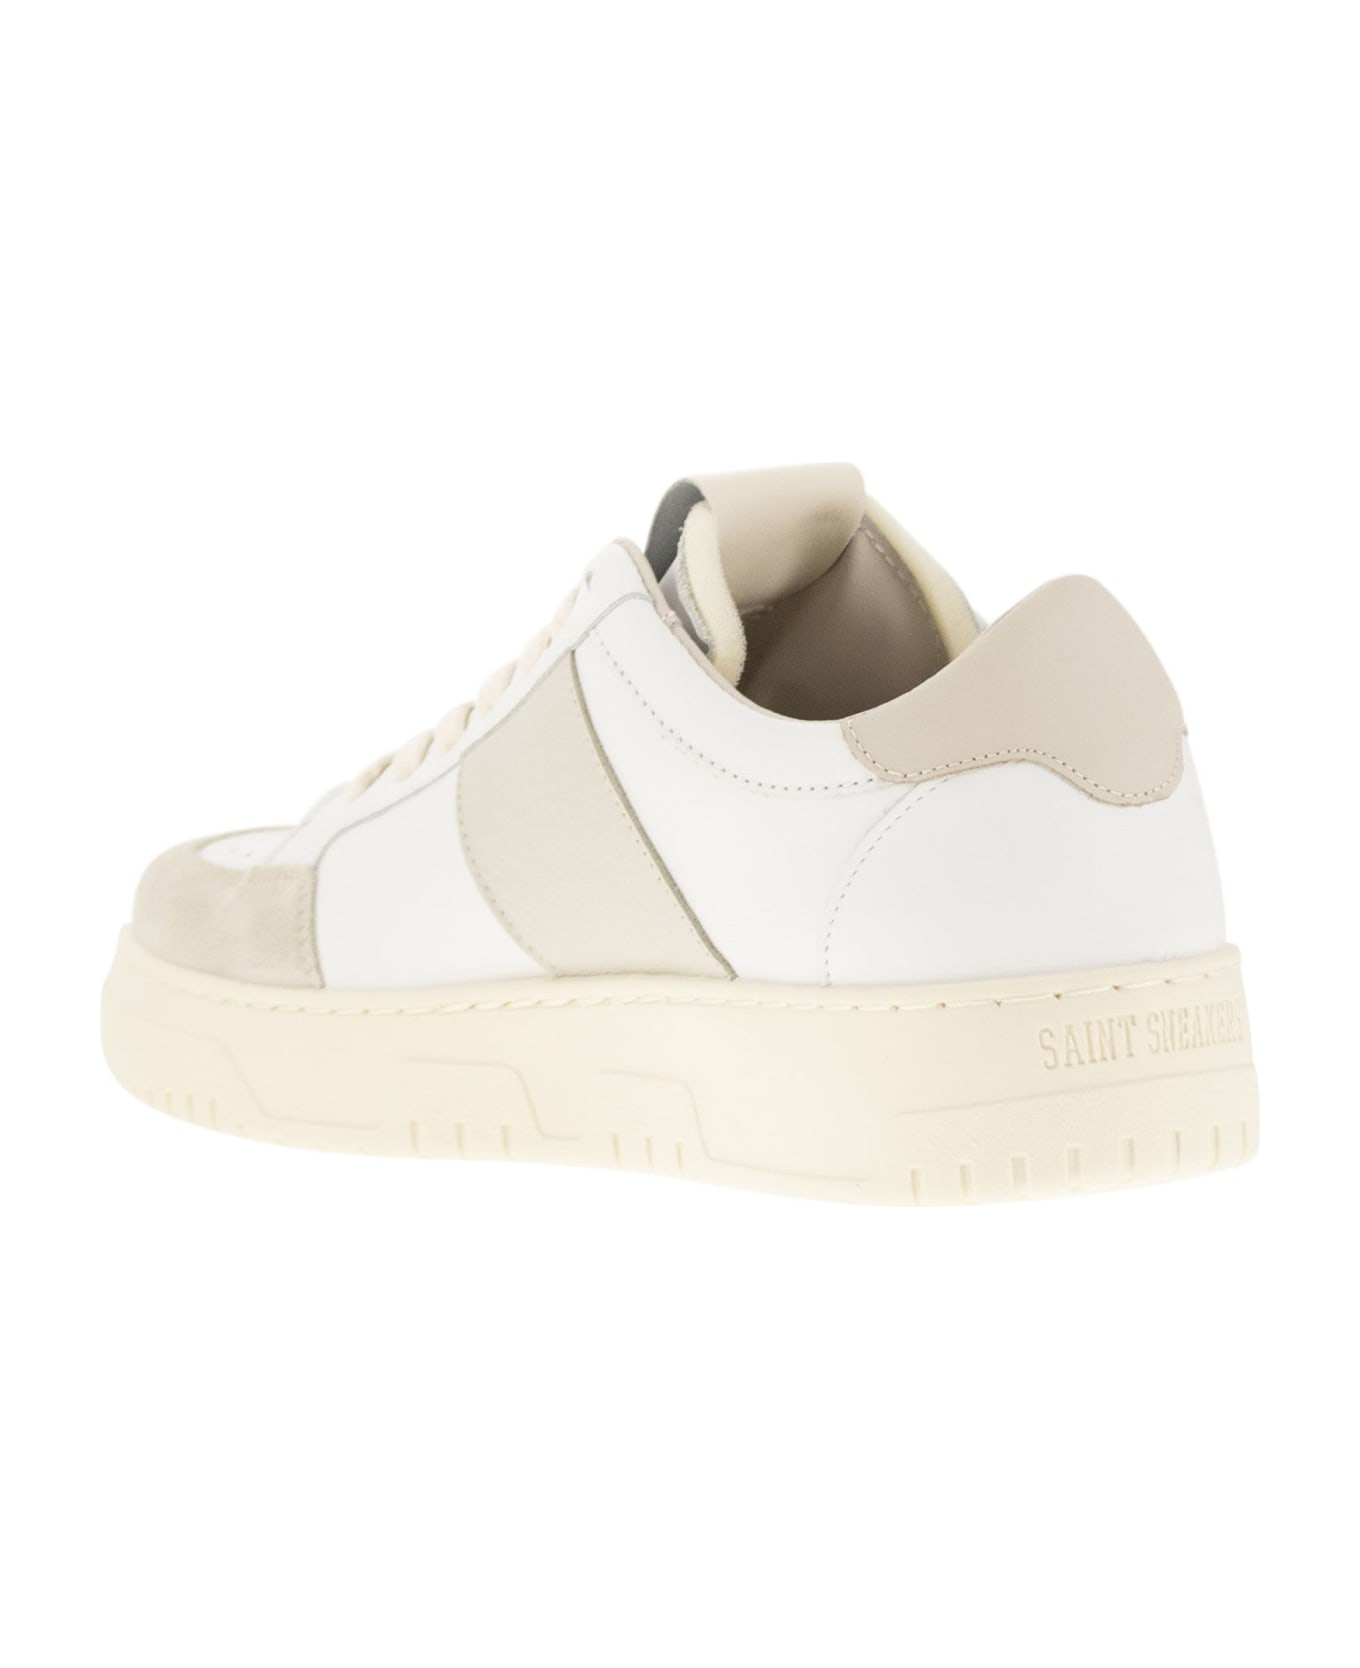 Saint Sneakers Sail - Leather And Suede Trainers - White/marble スニーカー